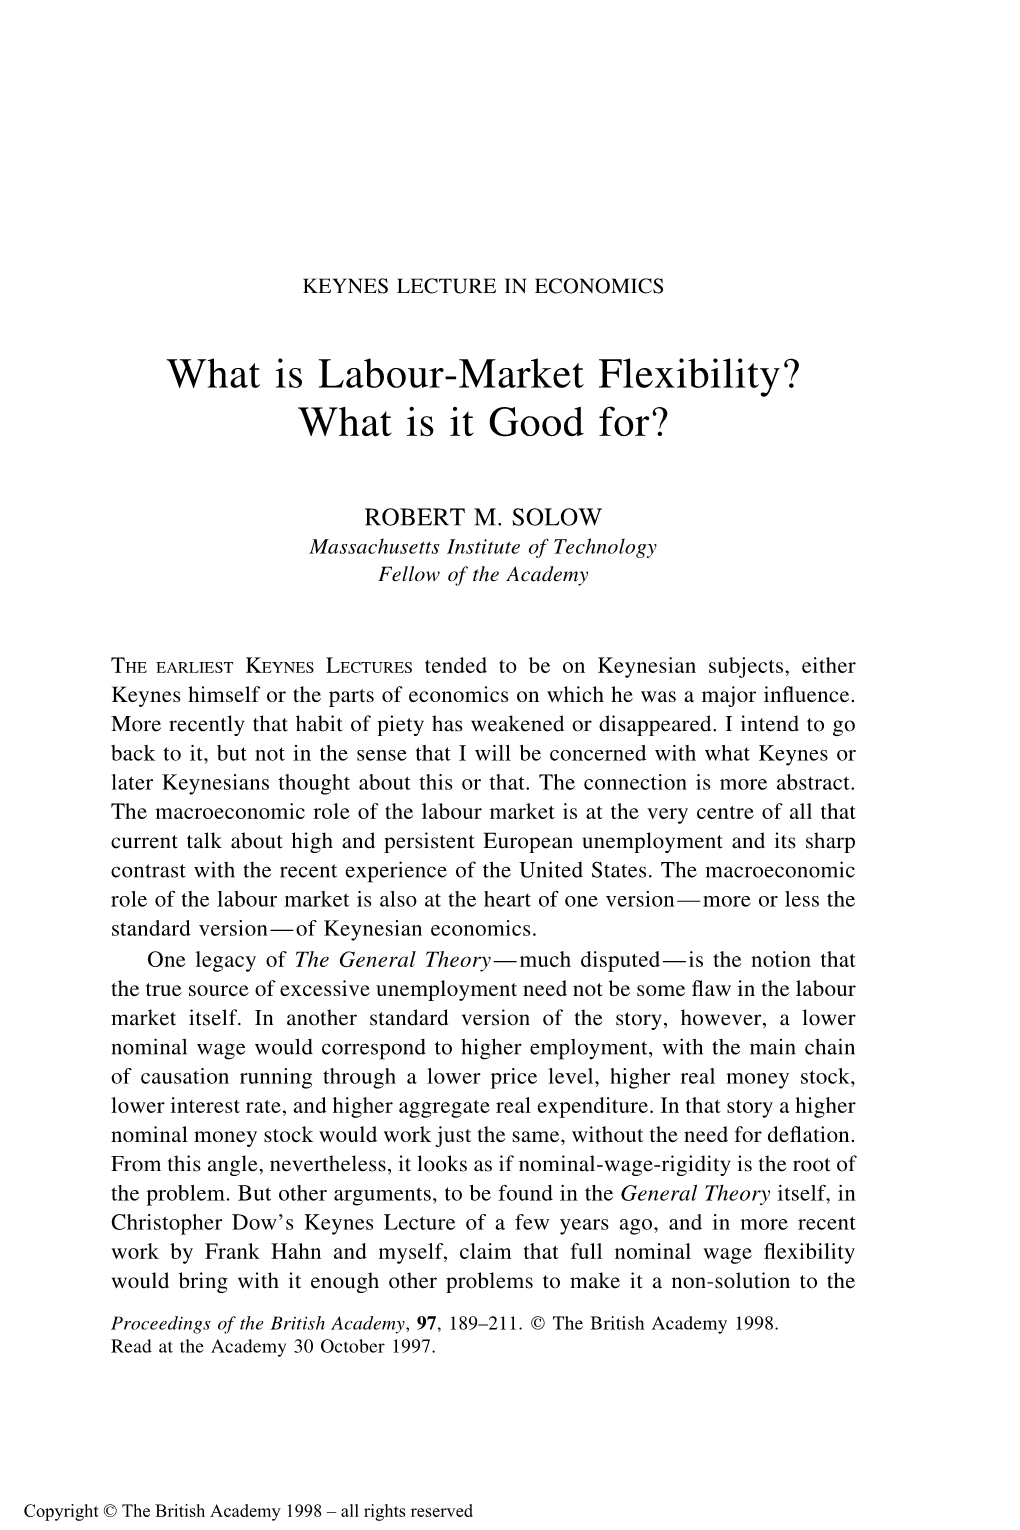 What Is Labour-Market Flexibility? What Is It Good For?